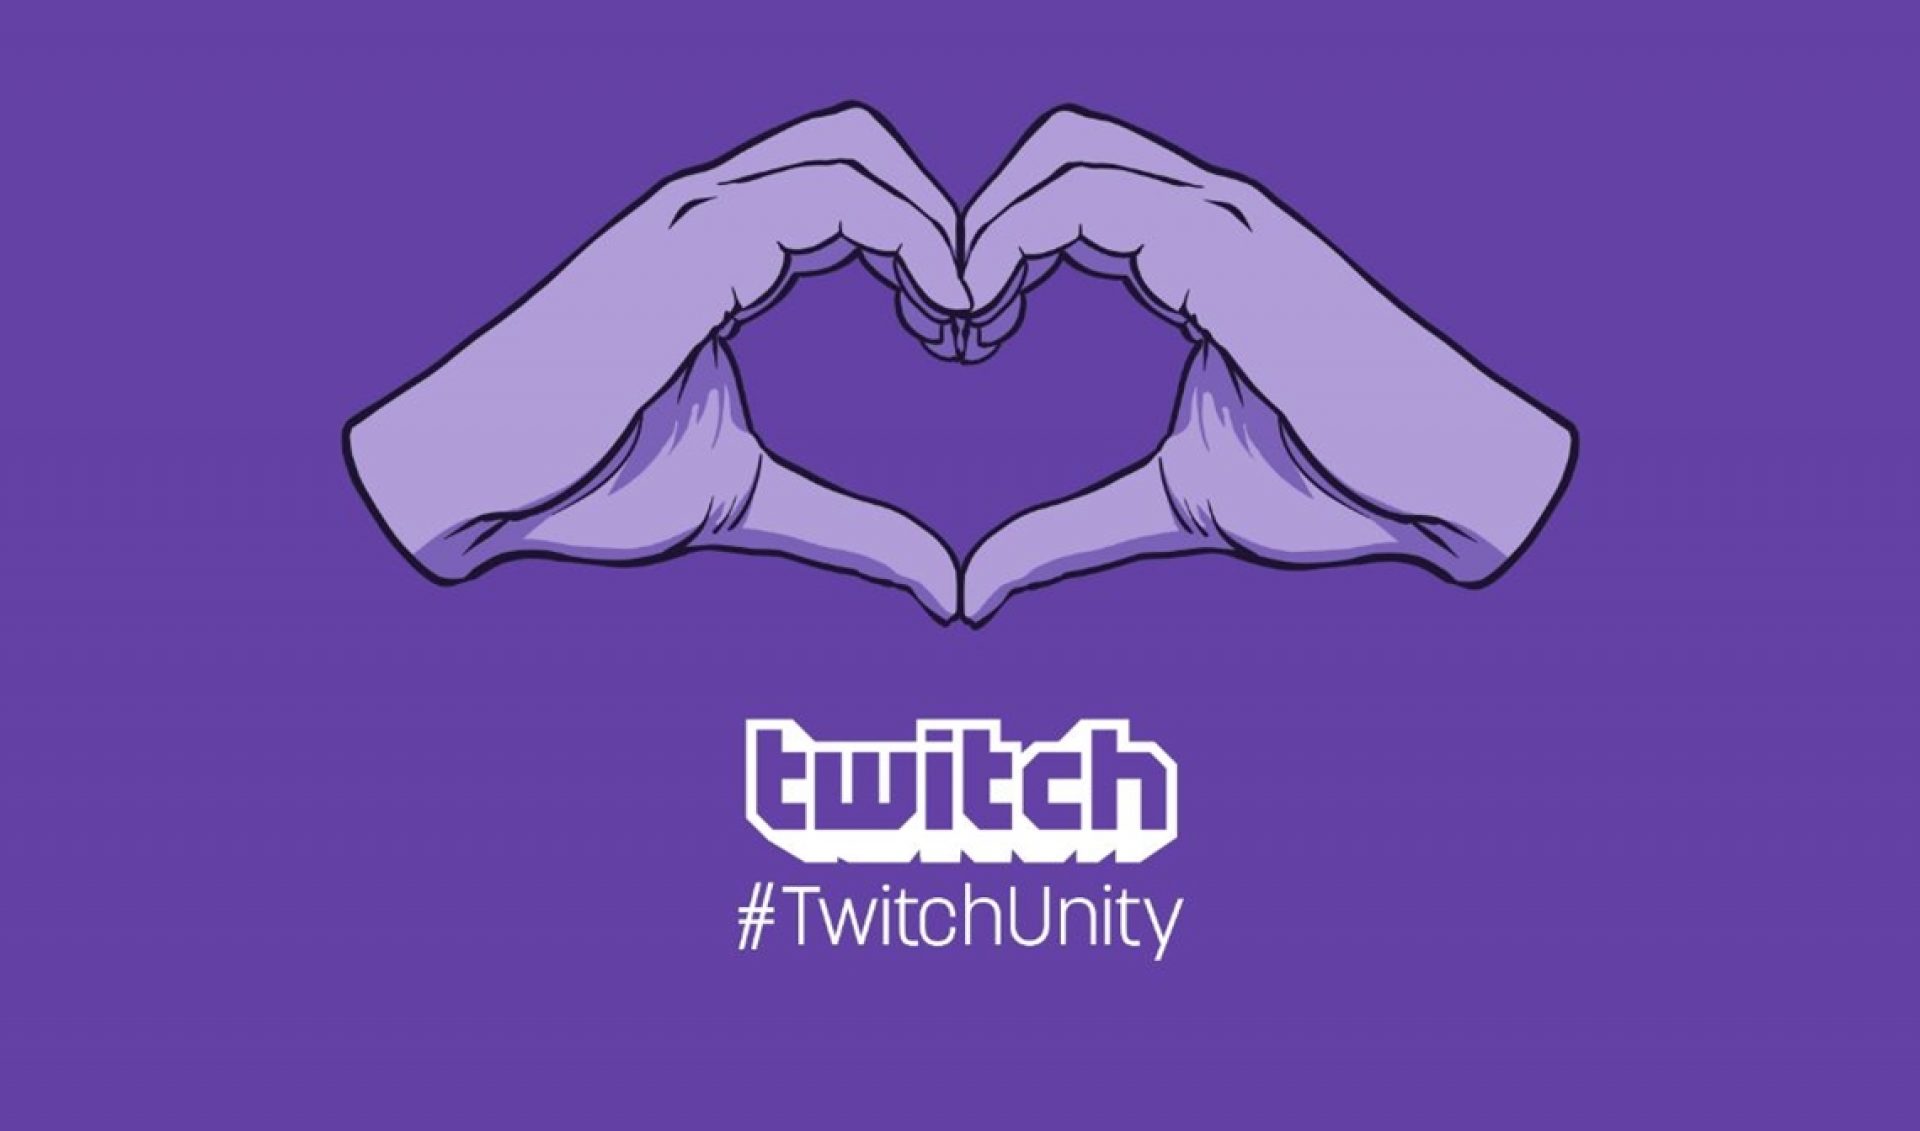 Twitch Launches ‘TwitchUnity’, A Sitewide Holiday To Champion Diversity